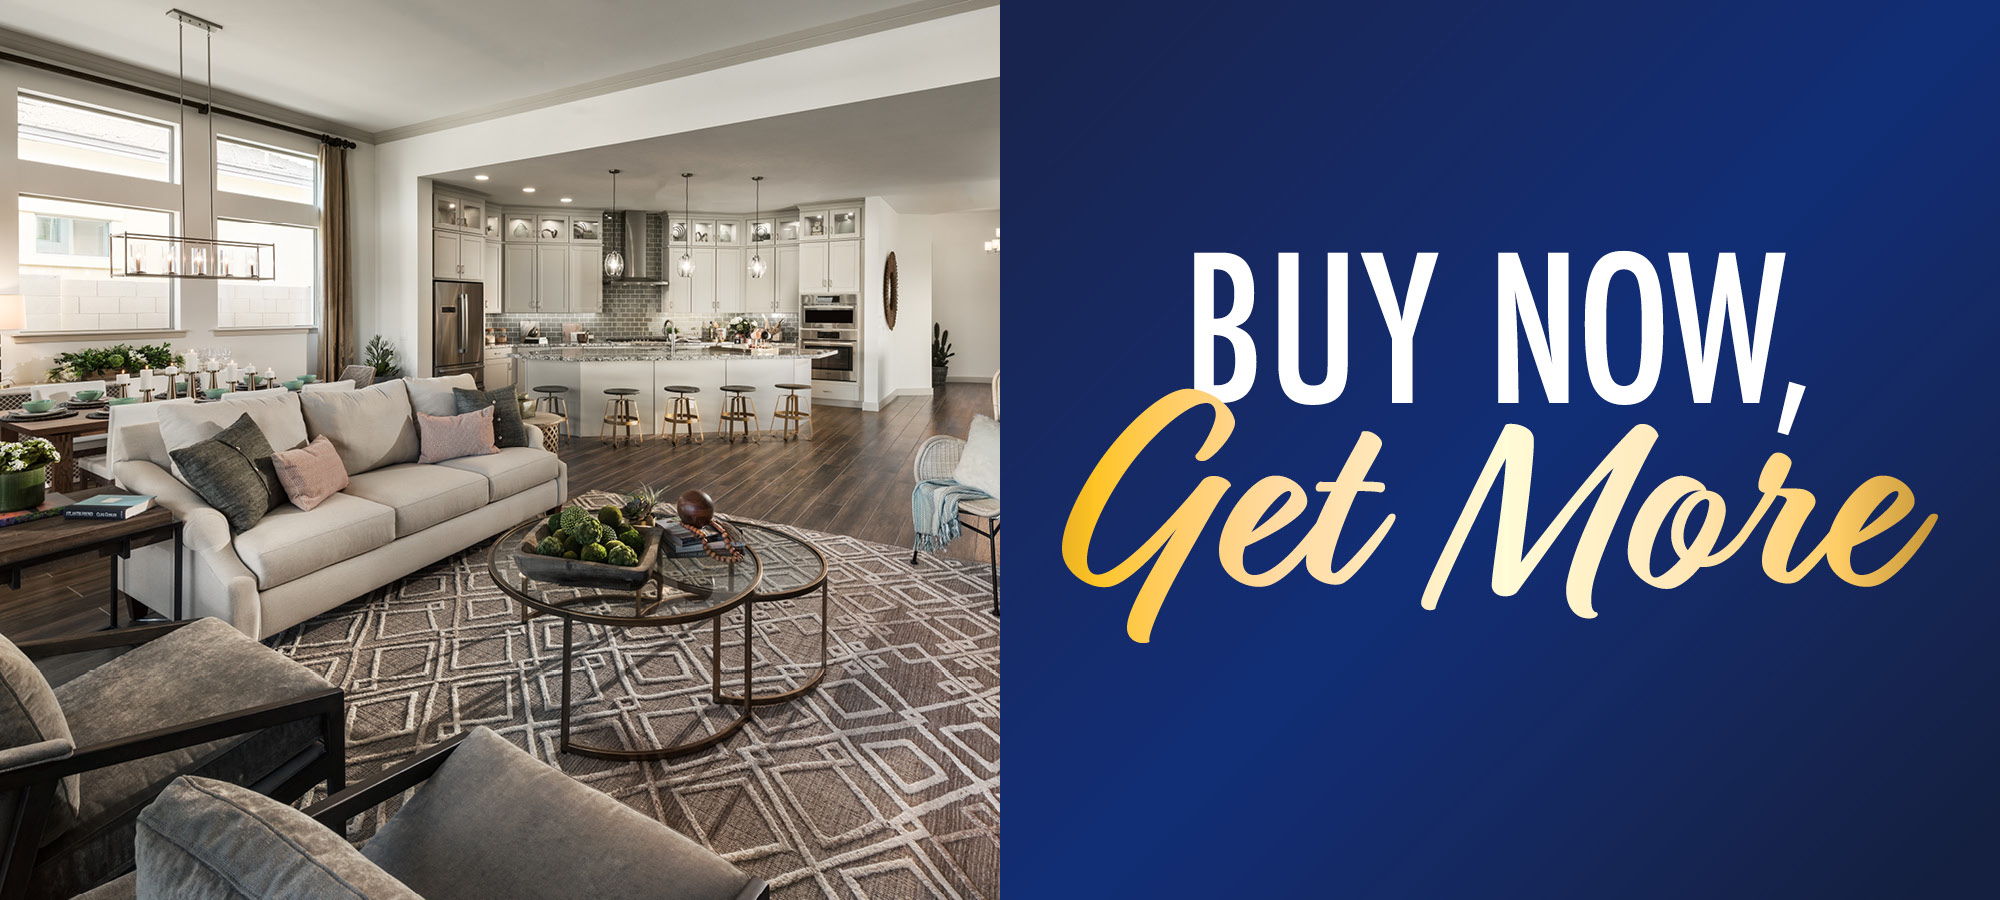 Buy Now, Get More in Union Park at Norterra